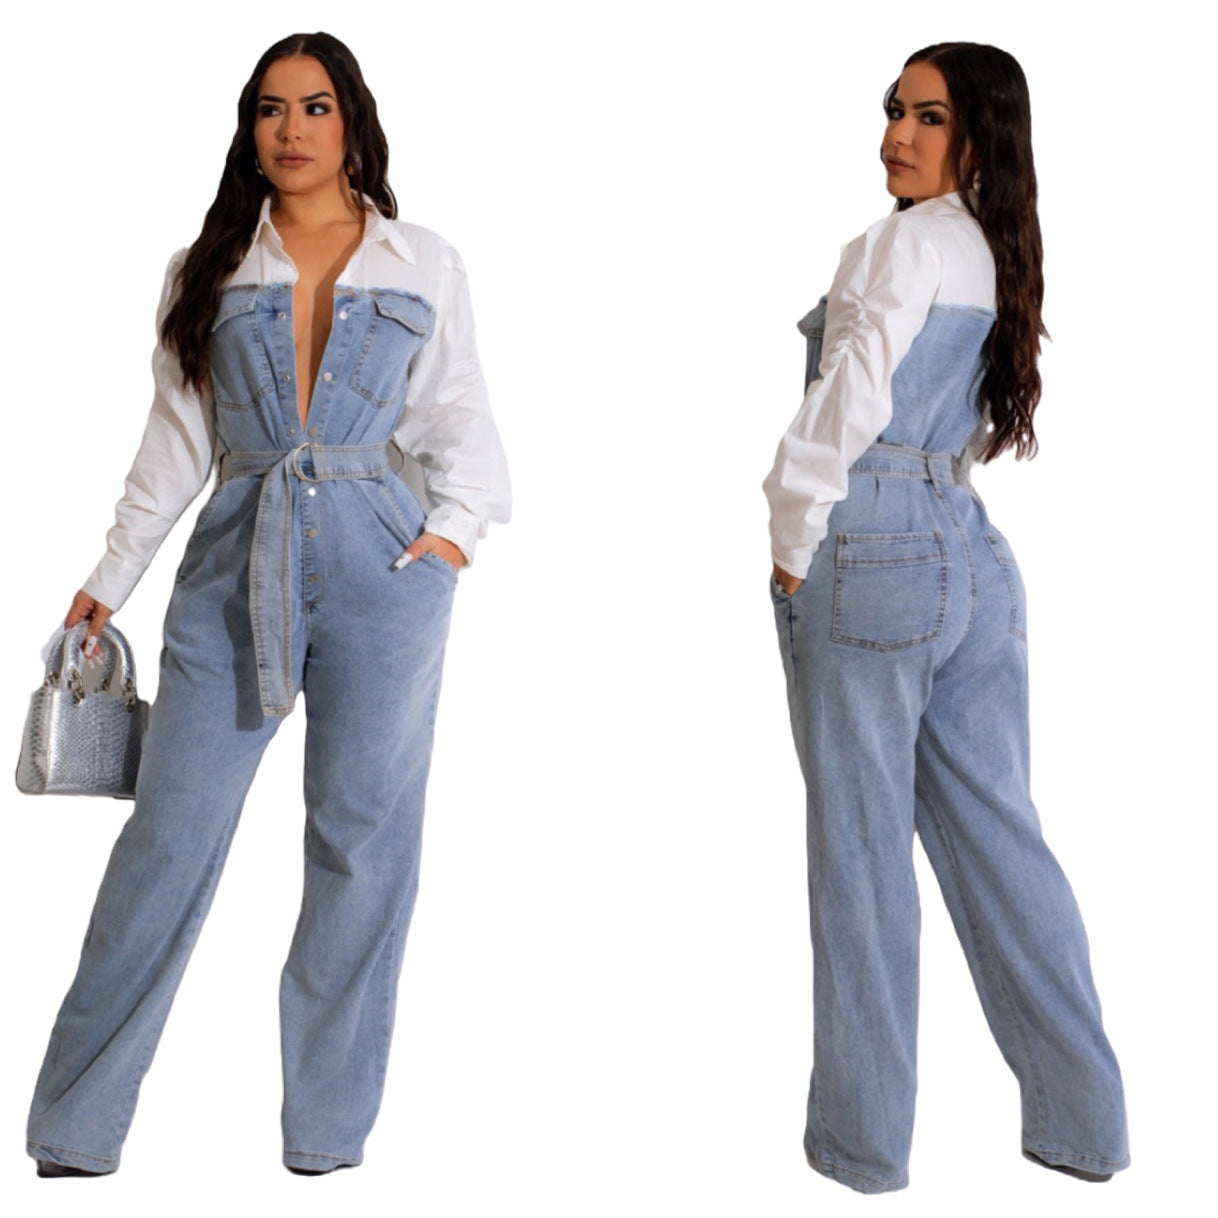 Curve Queen Chic: Playful Plus Size Casual Denim Stitching Jumpsuit for Effortless Style